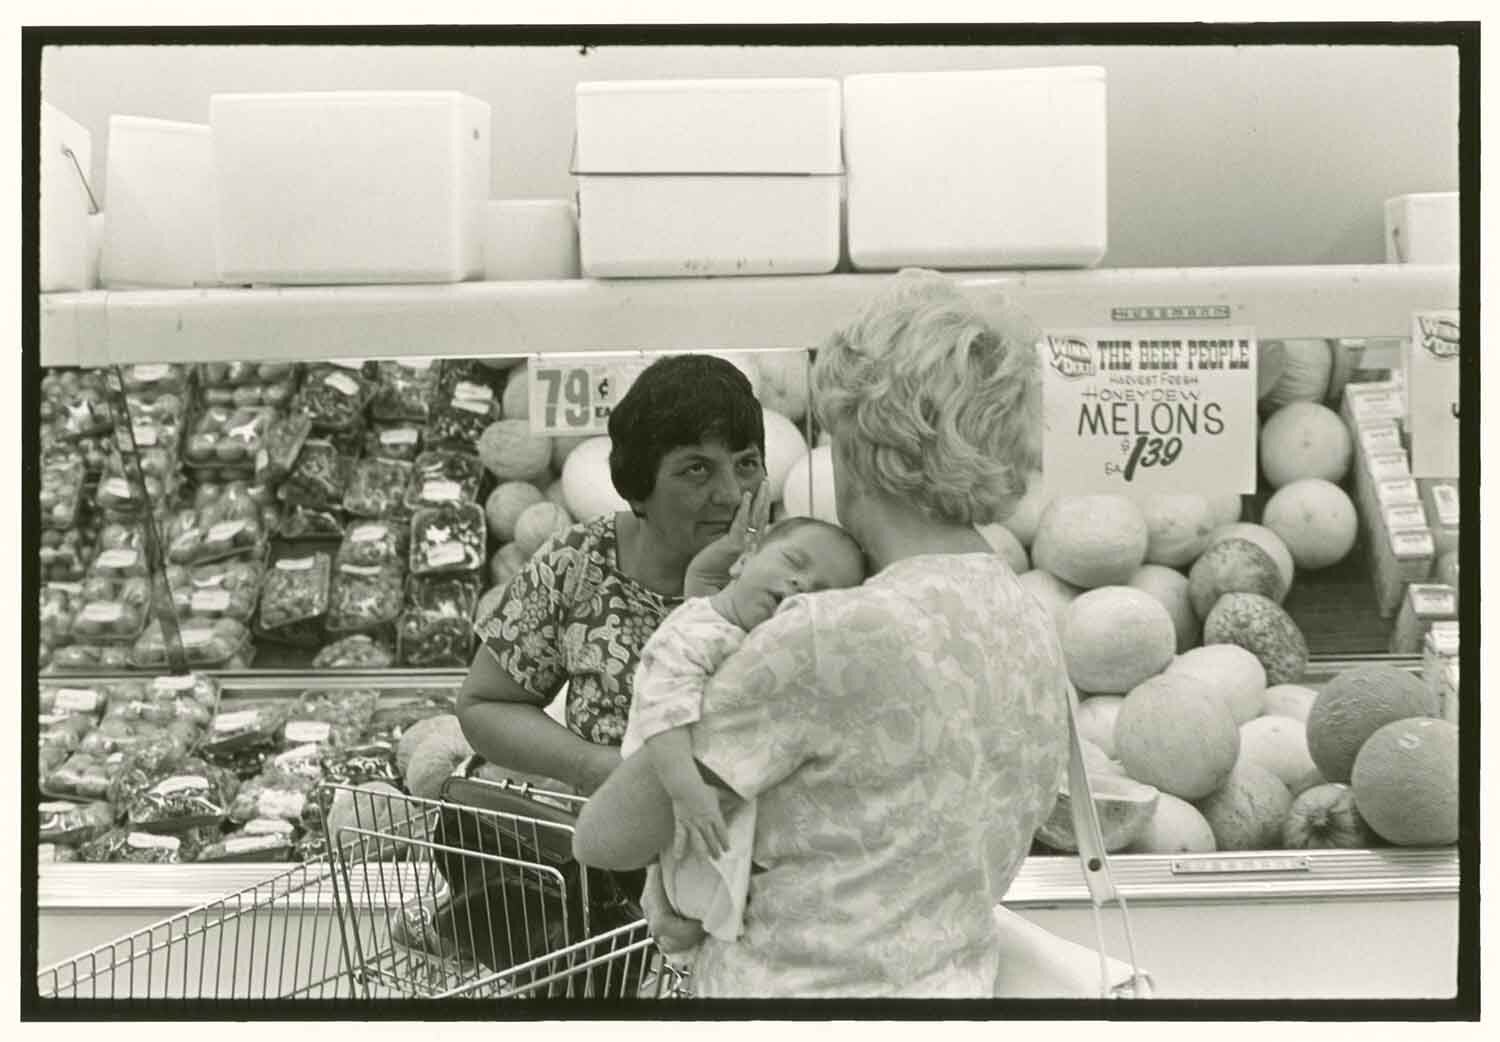   Grocery Store,  1978 Silver Gelatin Print 5 3/8 × 8 3/8 in. (image size) The Do Good Fund, Inc., 2015-64 